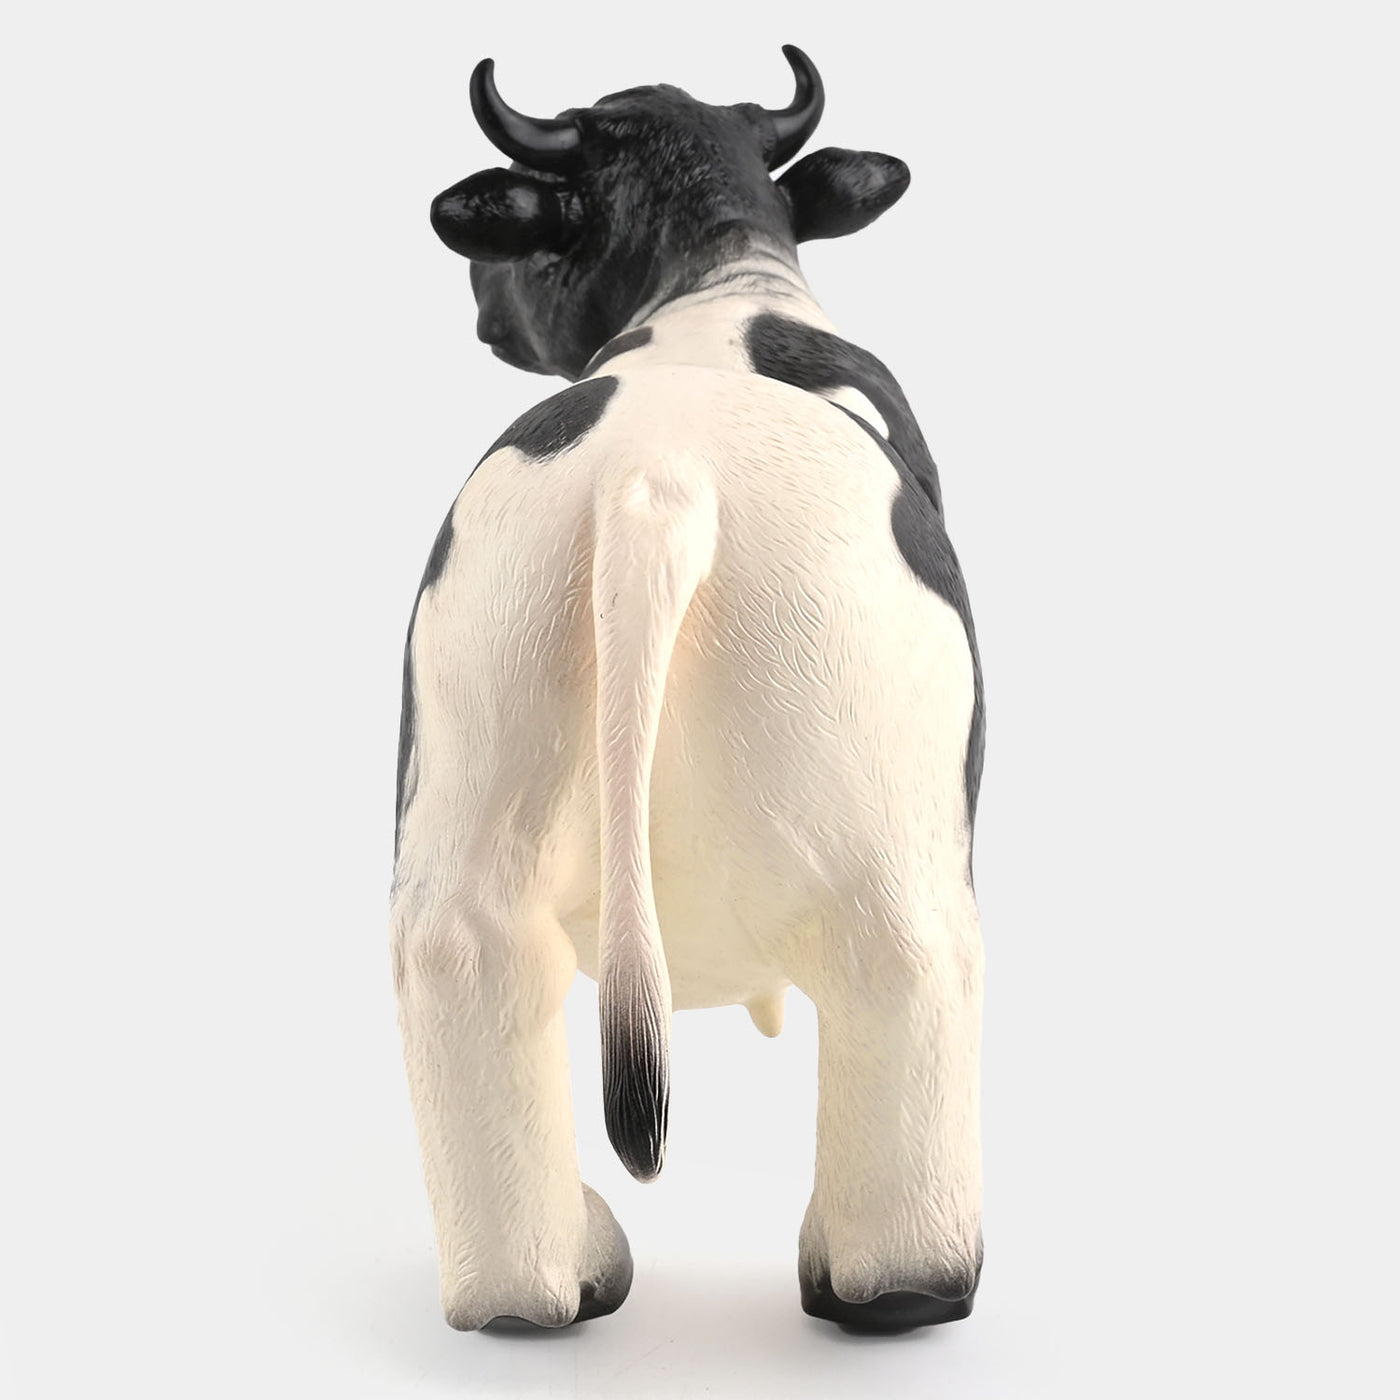 Rubber Farm Cow With Sound Toy For Kids